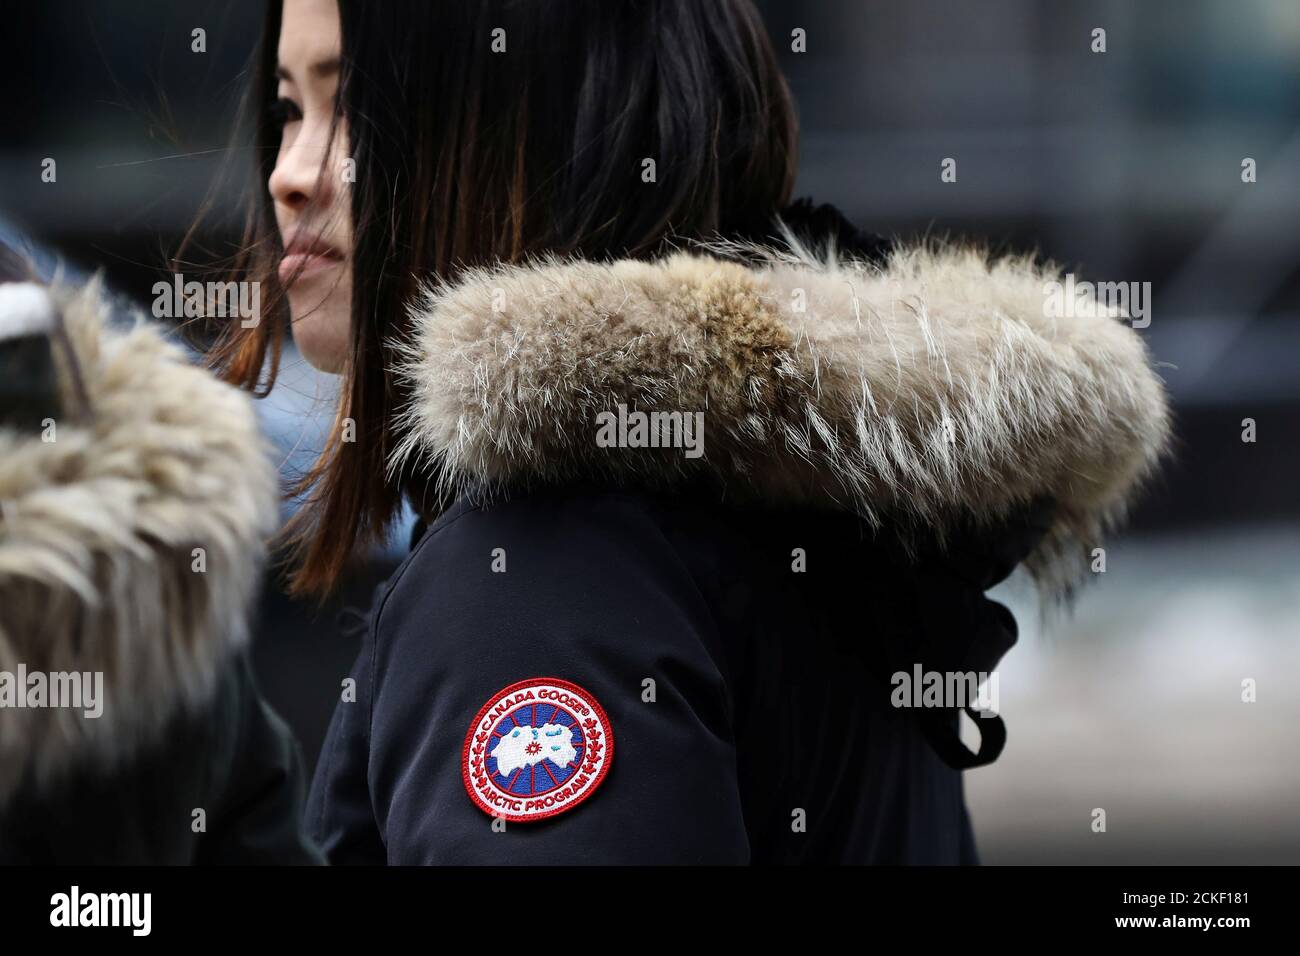 A woman wears a Canada Goose jacket at Times Square in New York, U.S.,  March 16, 2017. REUTERS/Shannon Stapleton Stock Photo - Alamy